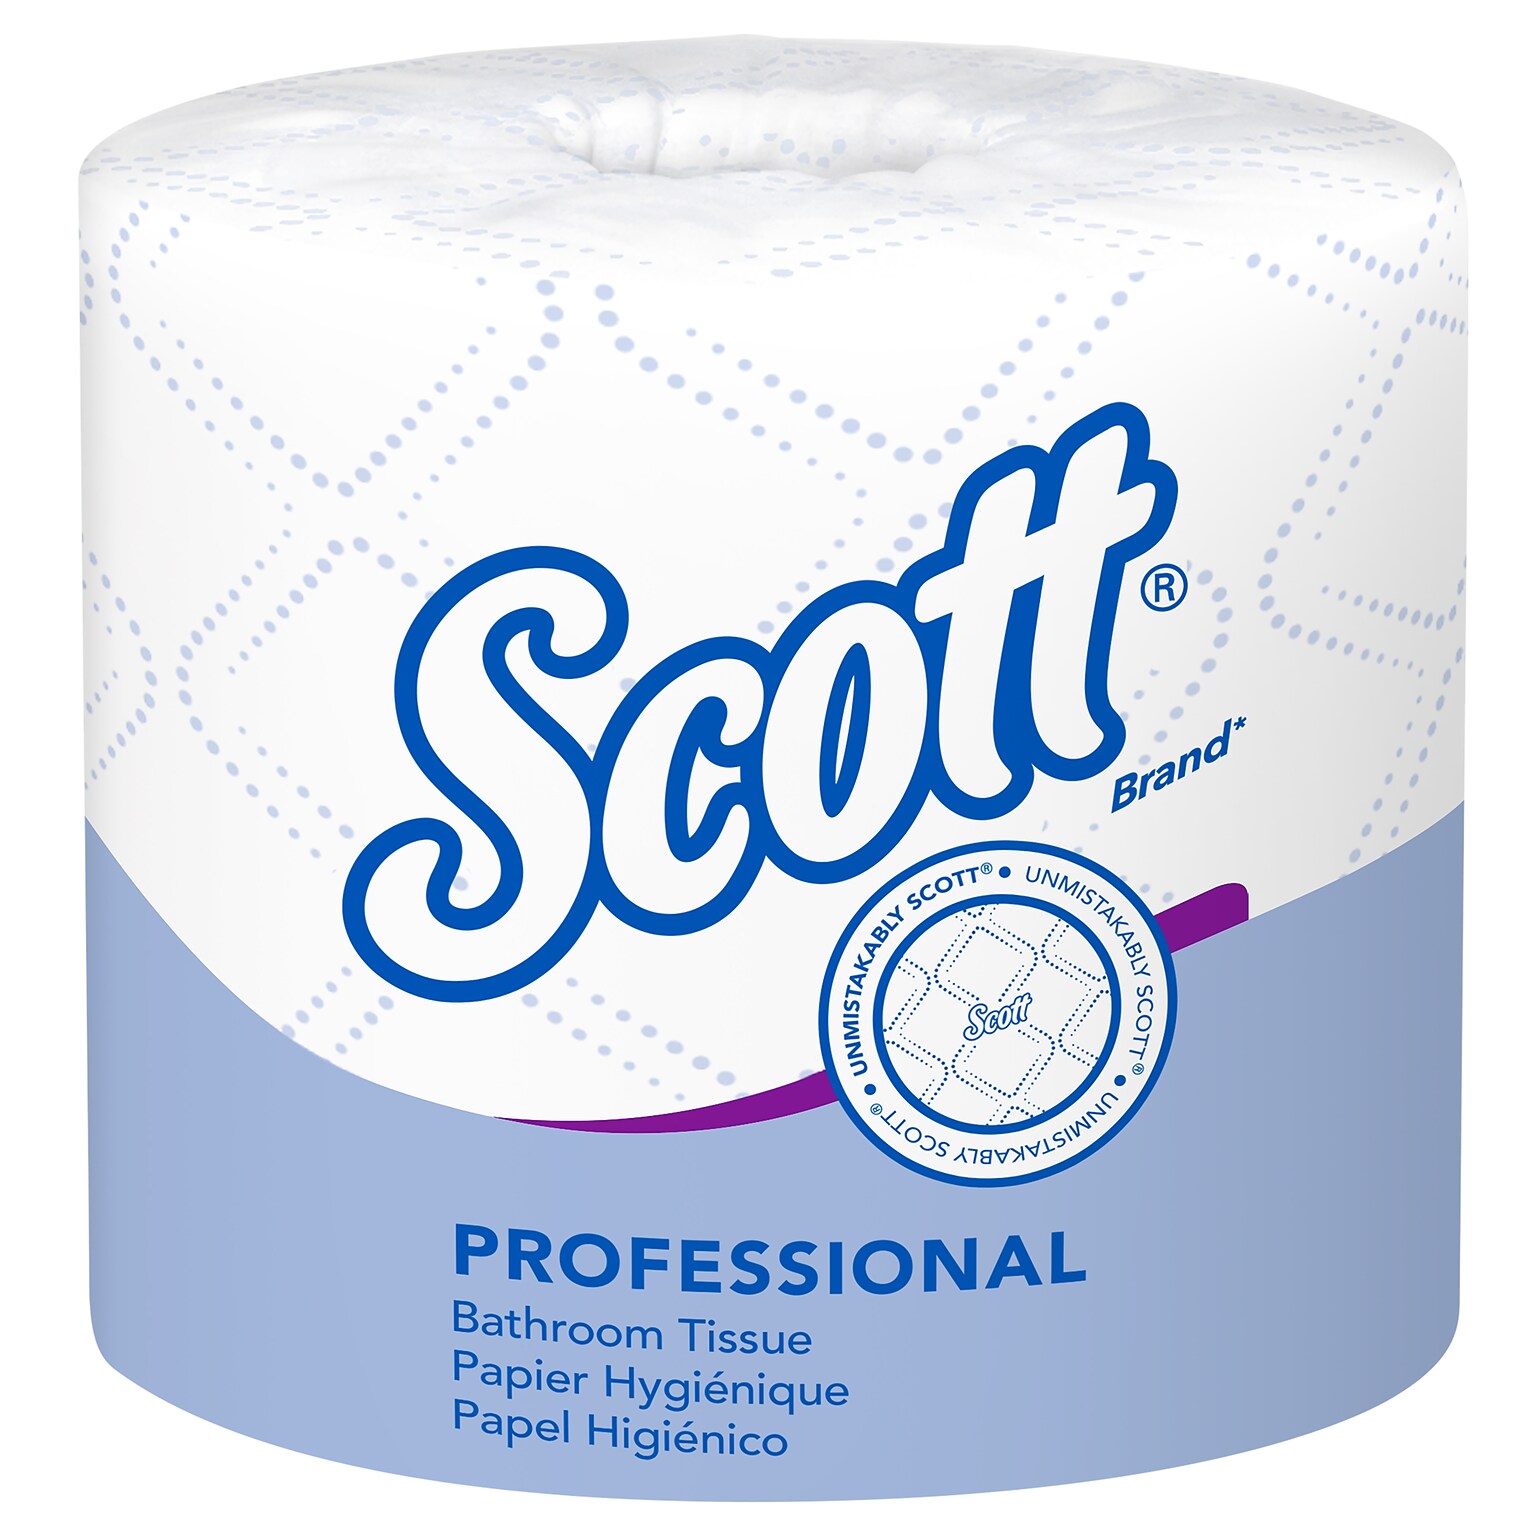 Scott Professional Recycled Toilet Paper, 2-ply, White, 550 Sheets/Roll, 80 Rolls/Case (04460)